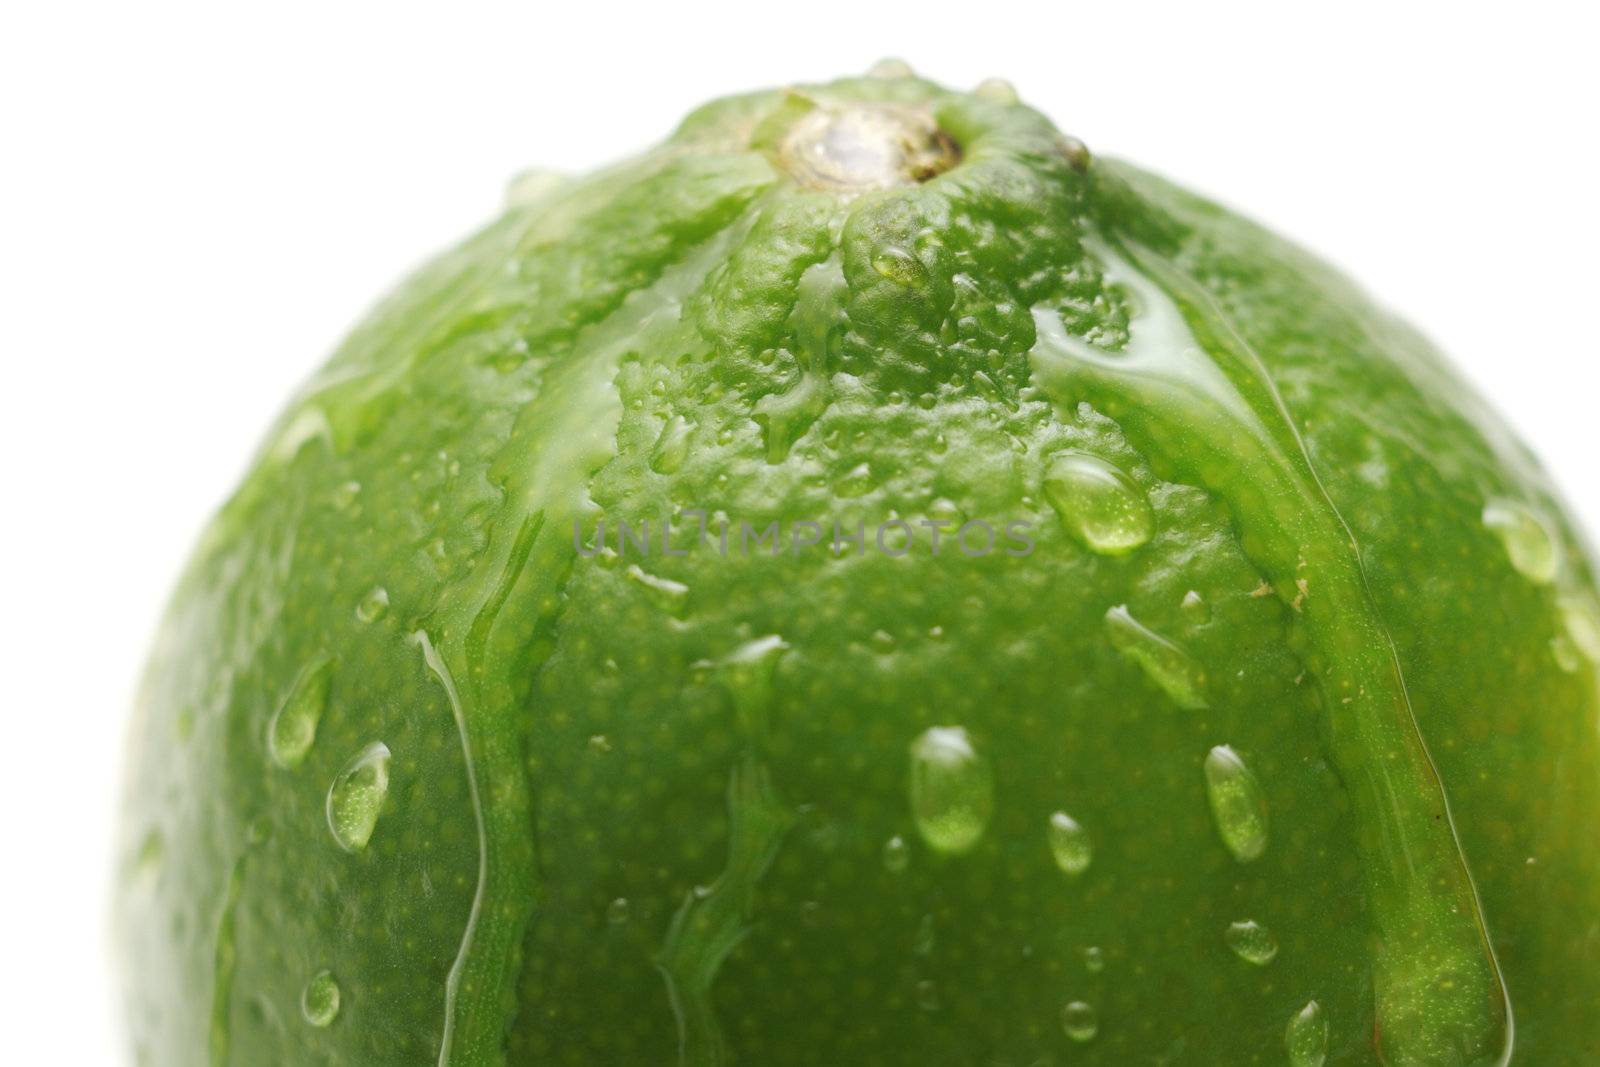 Juicy lime with waterdrops on its surface, isolated on white